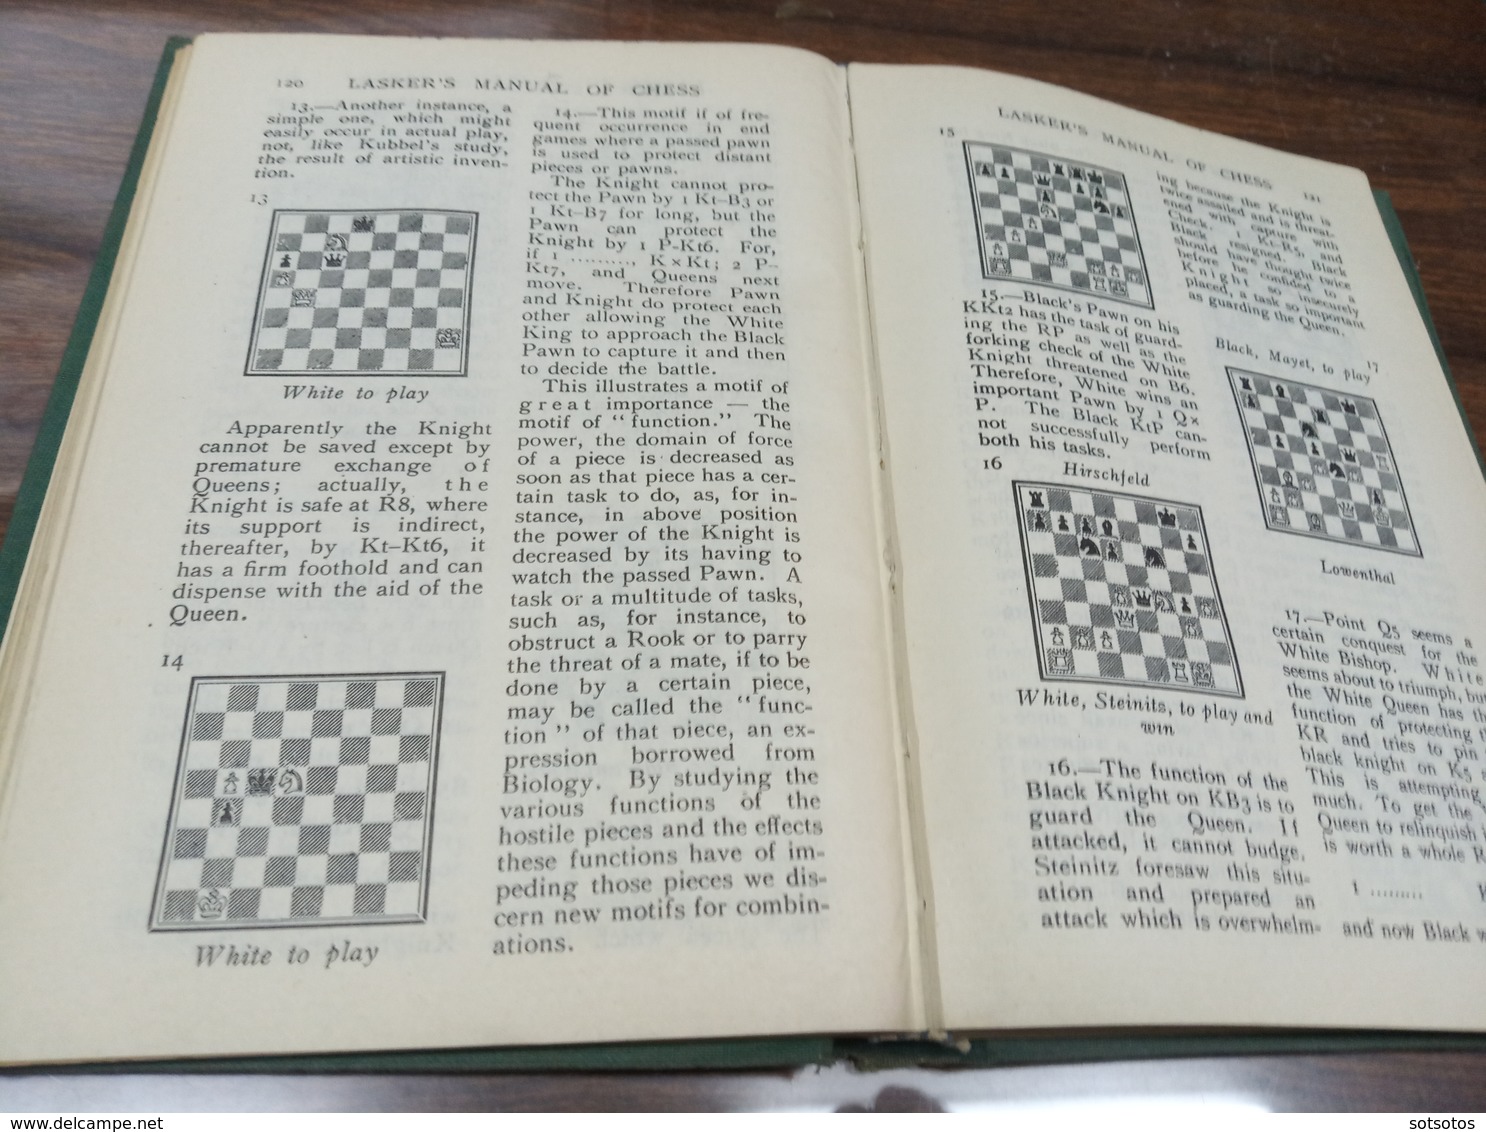 Lasker's Manual of Chess, Emanuel Lasker, Dover Publications N.Y.. 1960 - 374 pages (19x13,5 cm) - in good condition